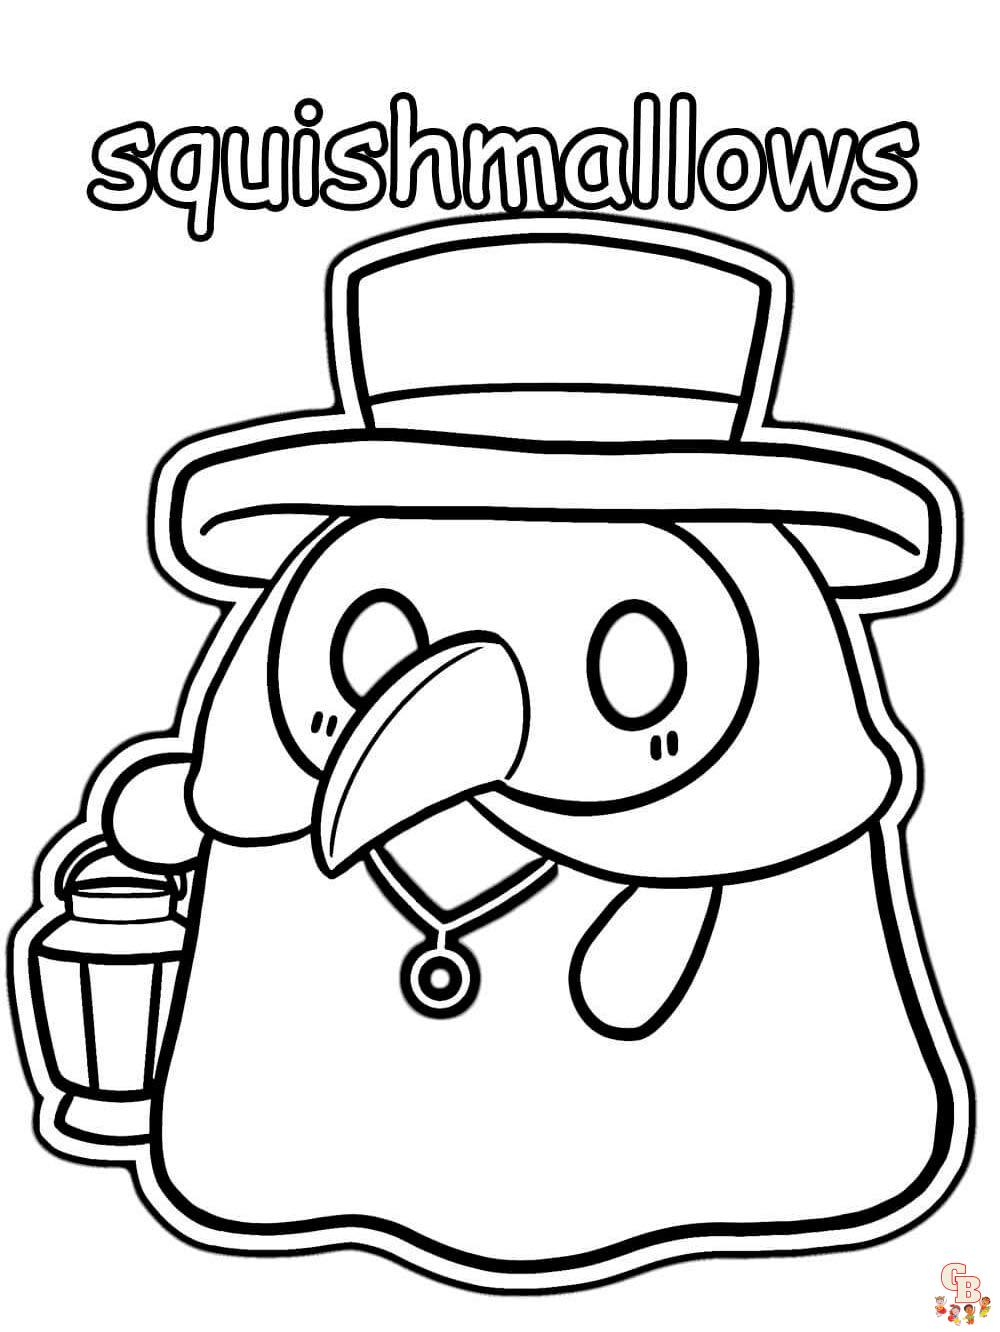 Squishmallows Coloring Pages for Kids | Free Printable Sheets